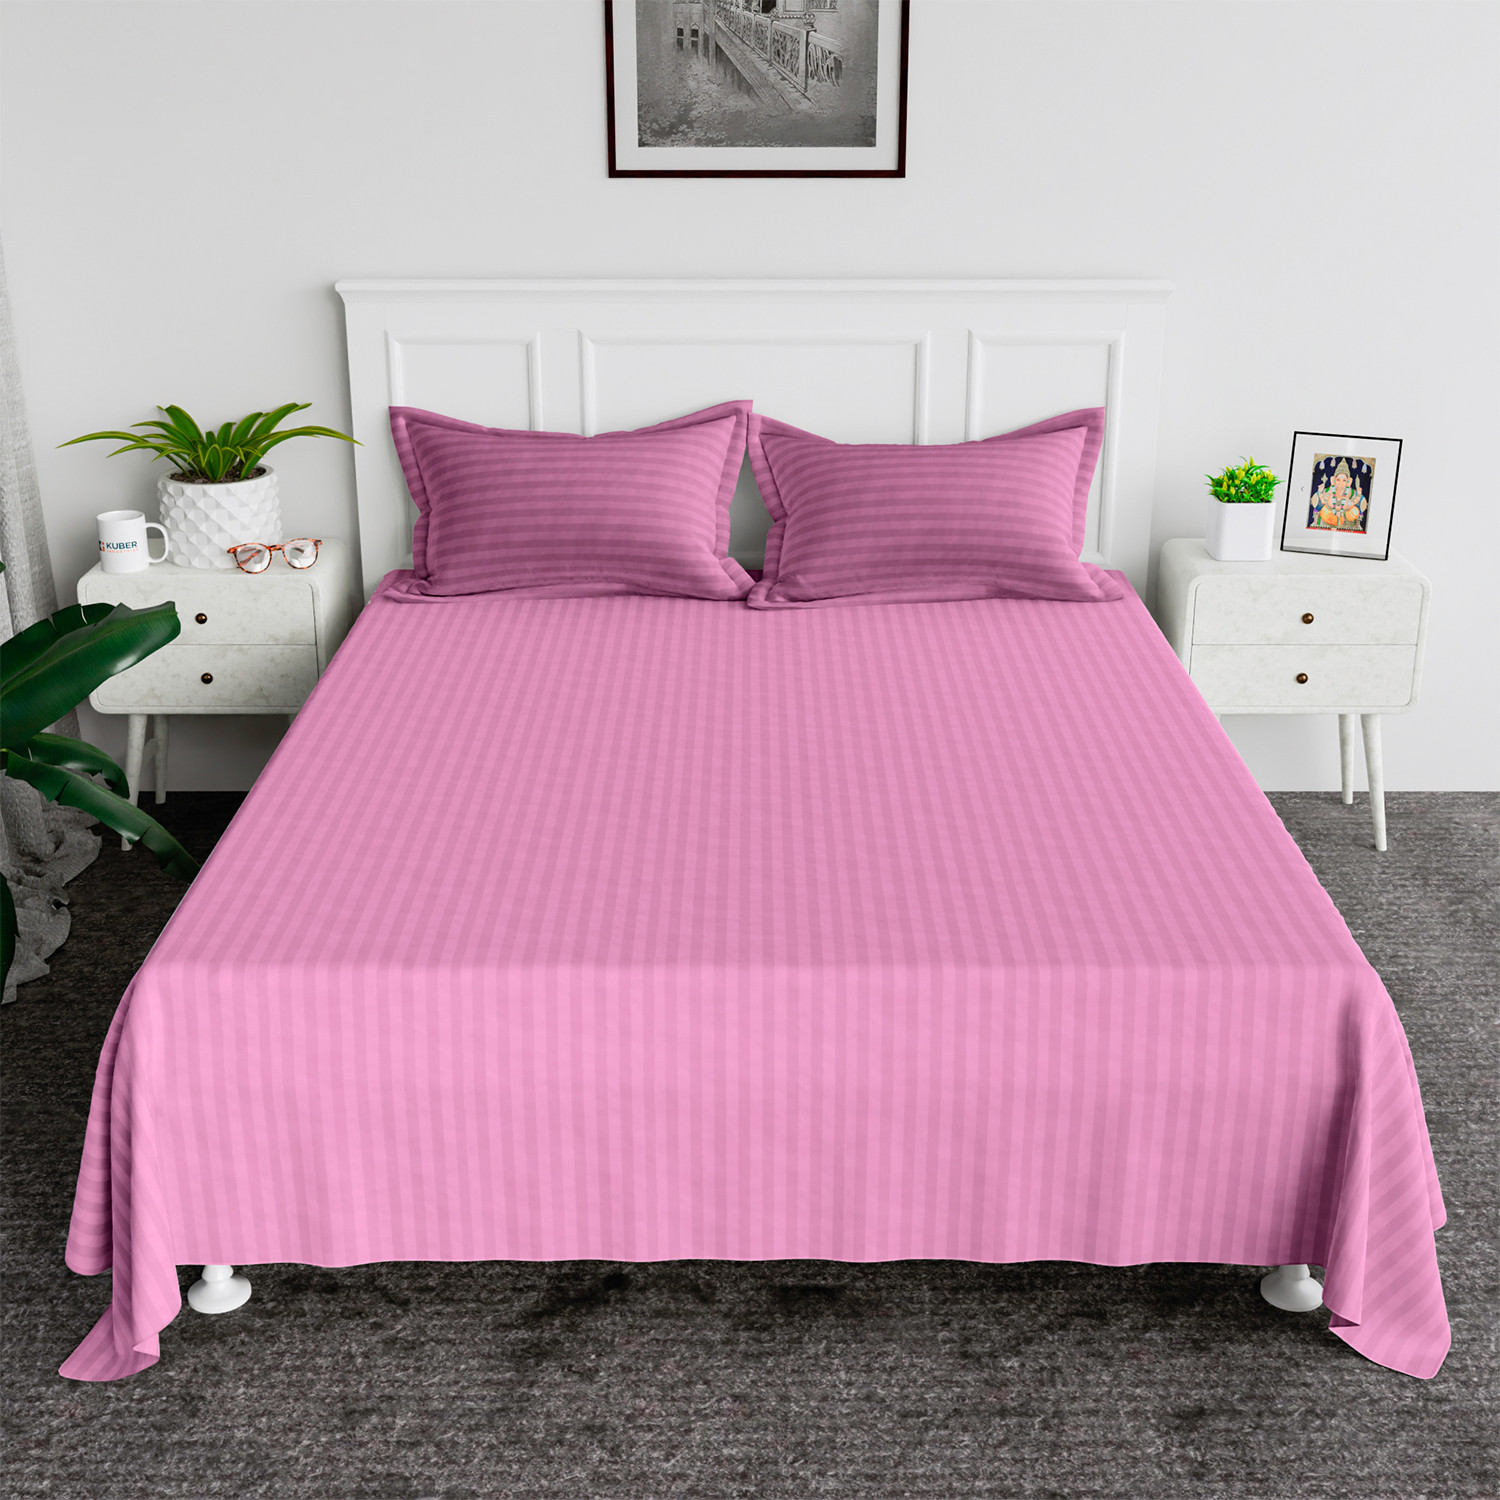 Kuber Industries Double Bedsheet with 2 Pillow Covers | 144 TC Glace Cotton Bedsheet | Satin Striped Bedsheet for Home | Hotel | Bedroom | 90x100 Inch | Pink